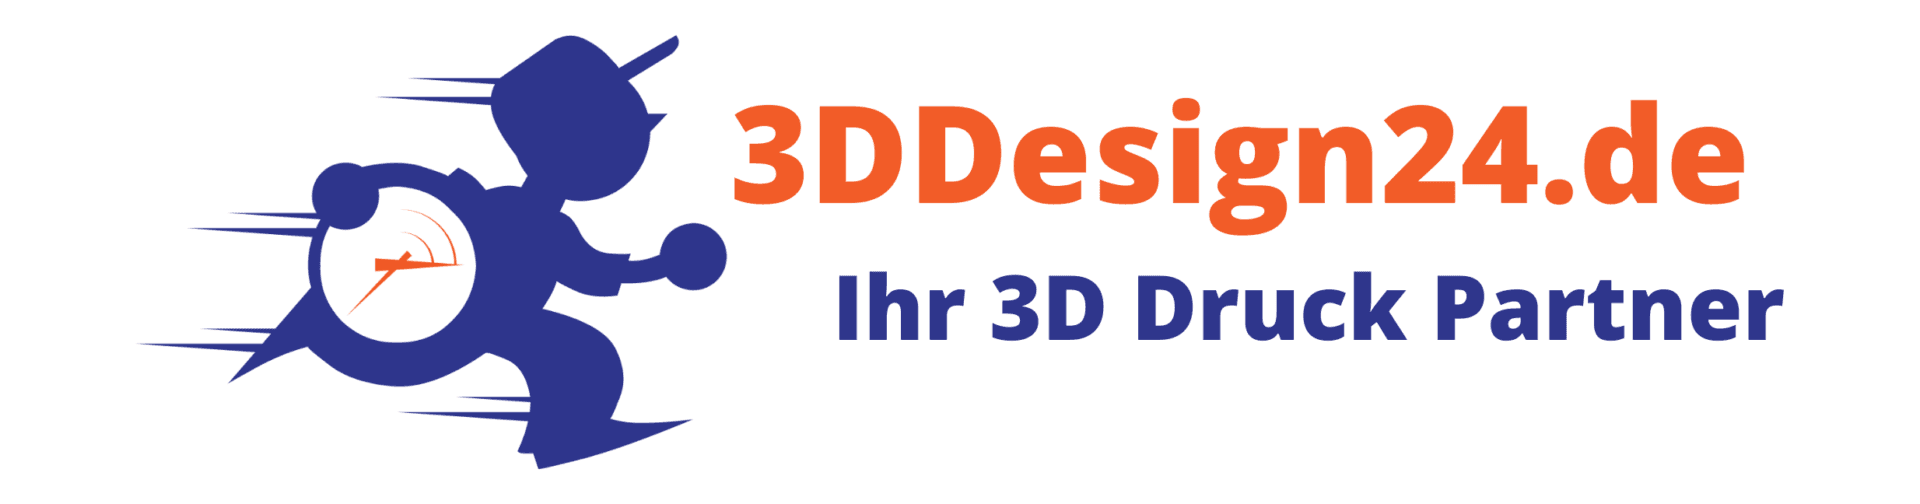 Product Express-Service im 3D Druck image